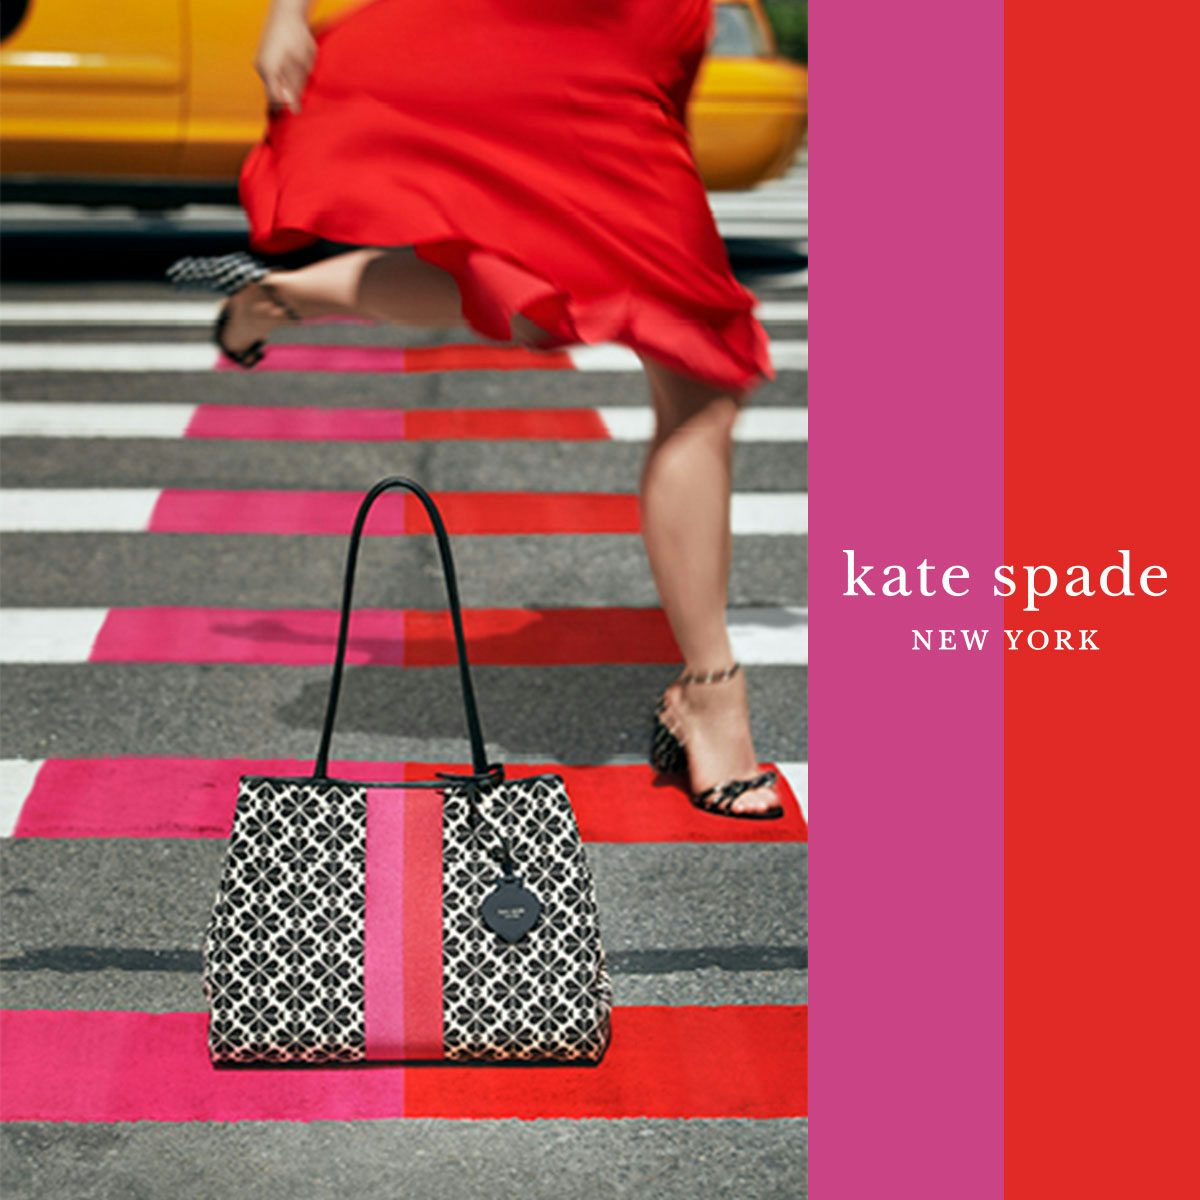 kate spade new york's Page, BoF Careers